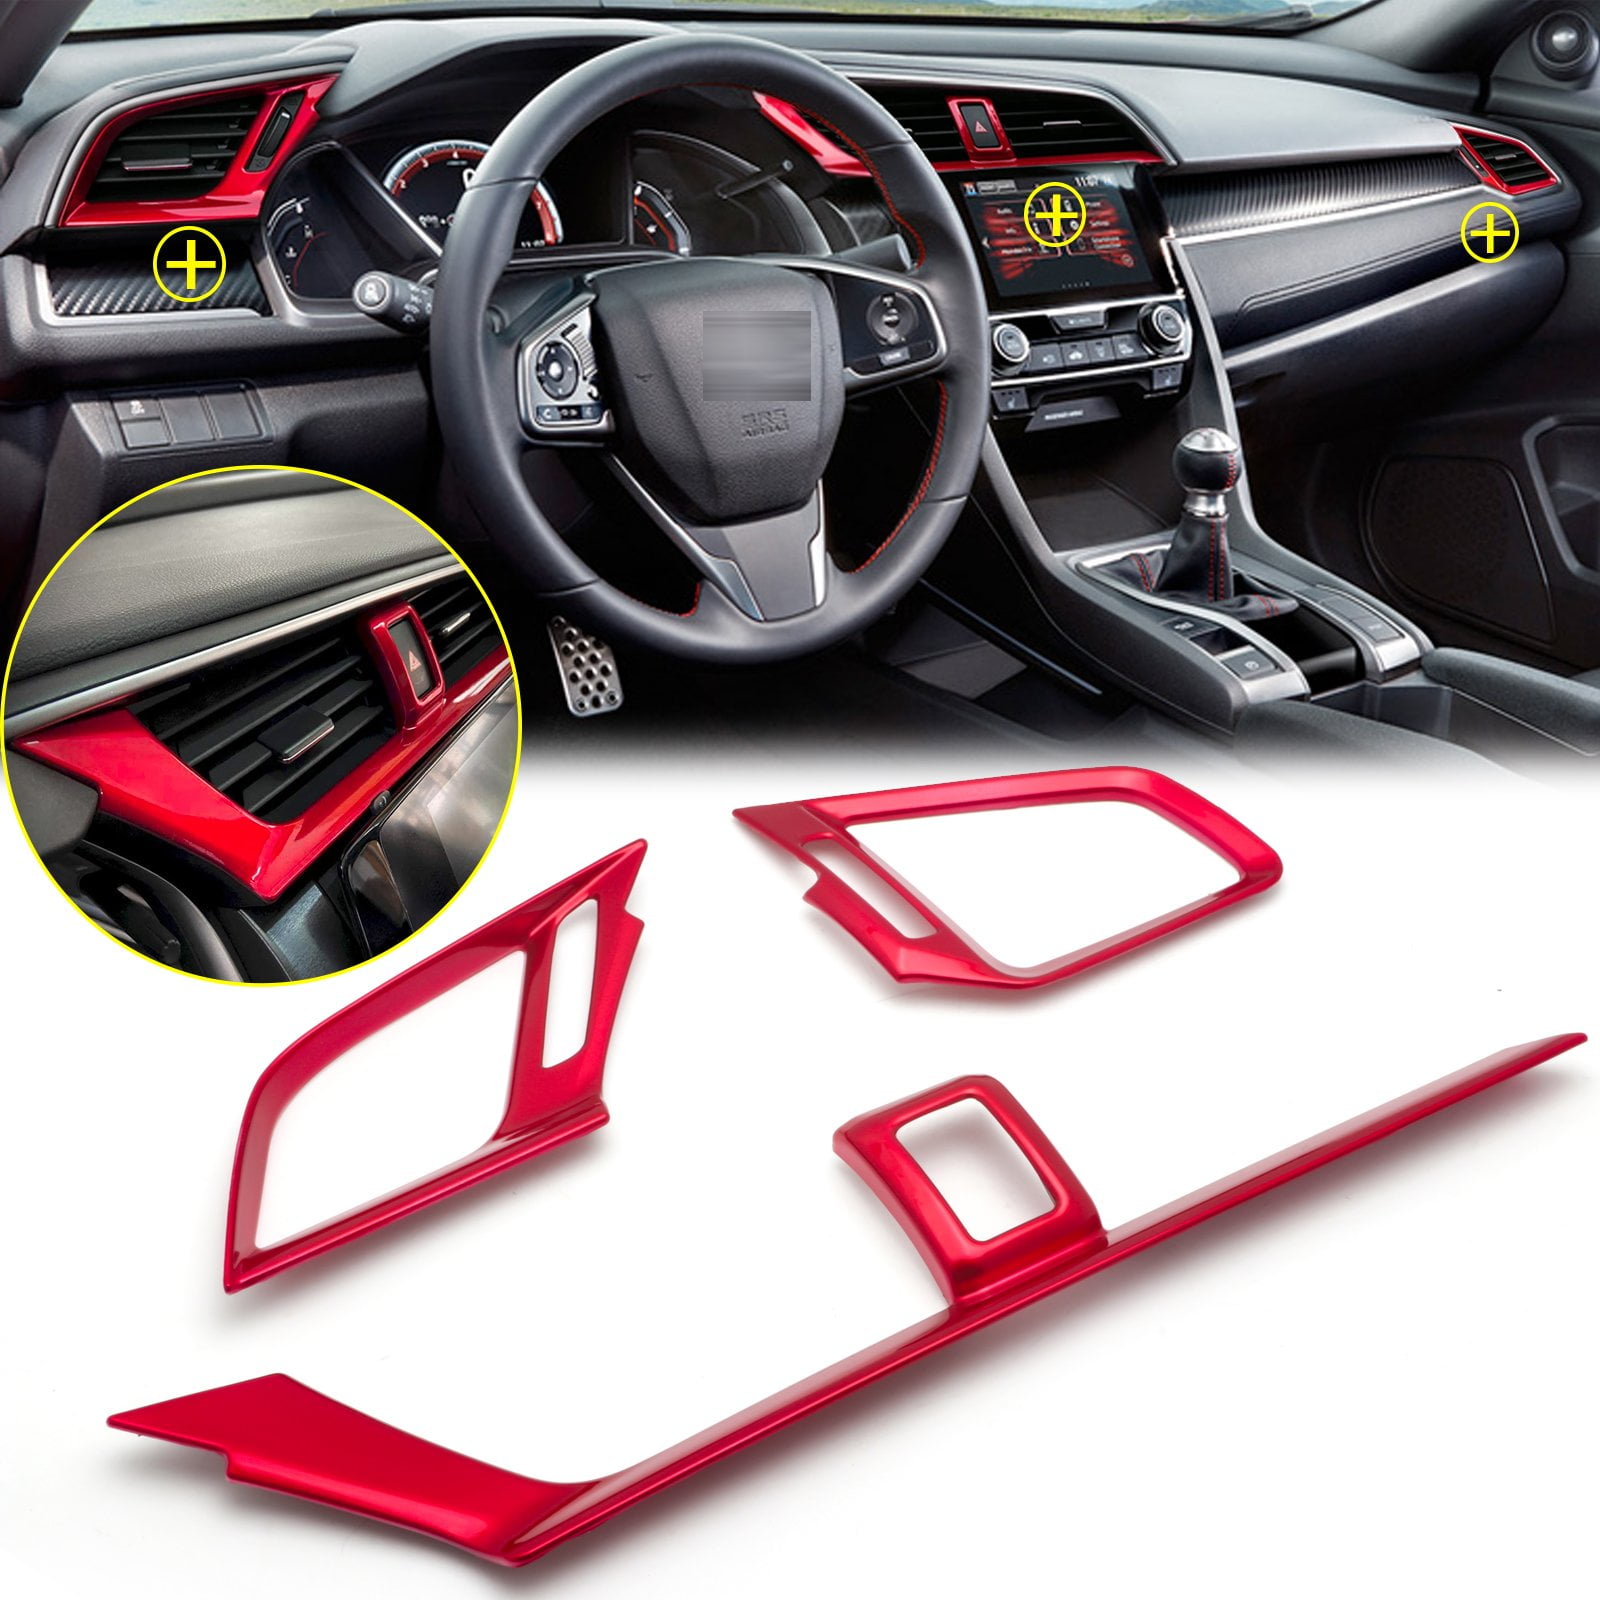 Red Dashboard Decorative Frame for Honda Civic 10th GEN 2016 2017 2018 